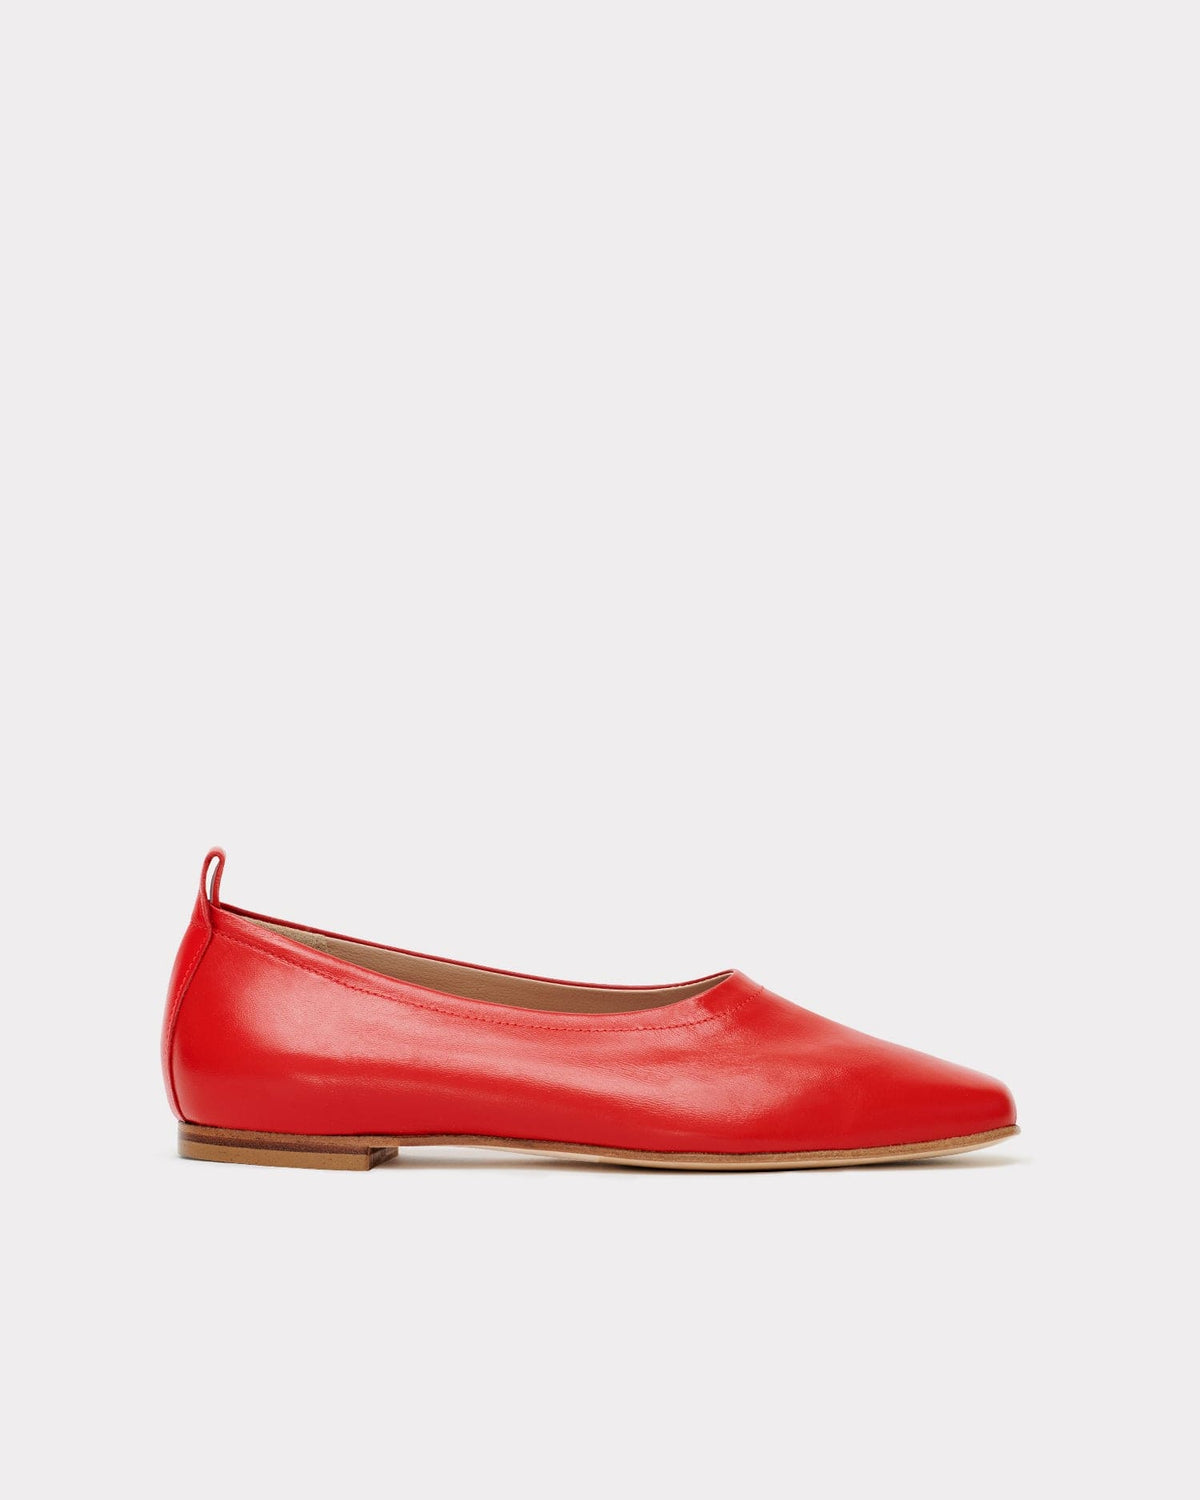 The Foundation Flat - Red Ballet Flats